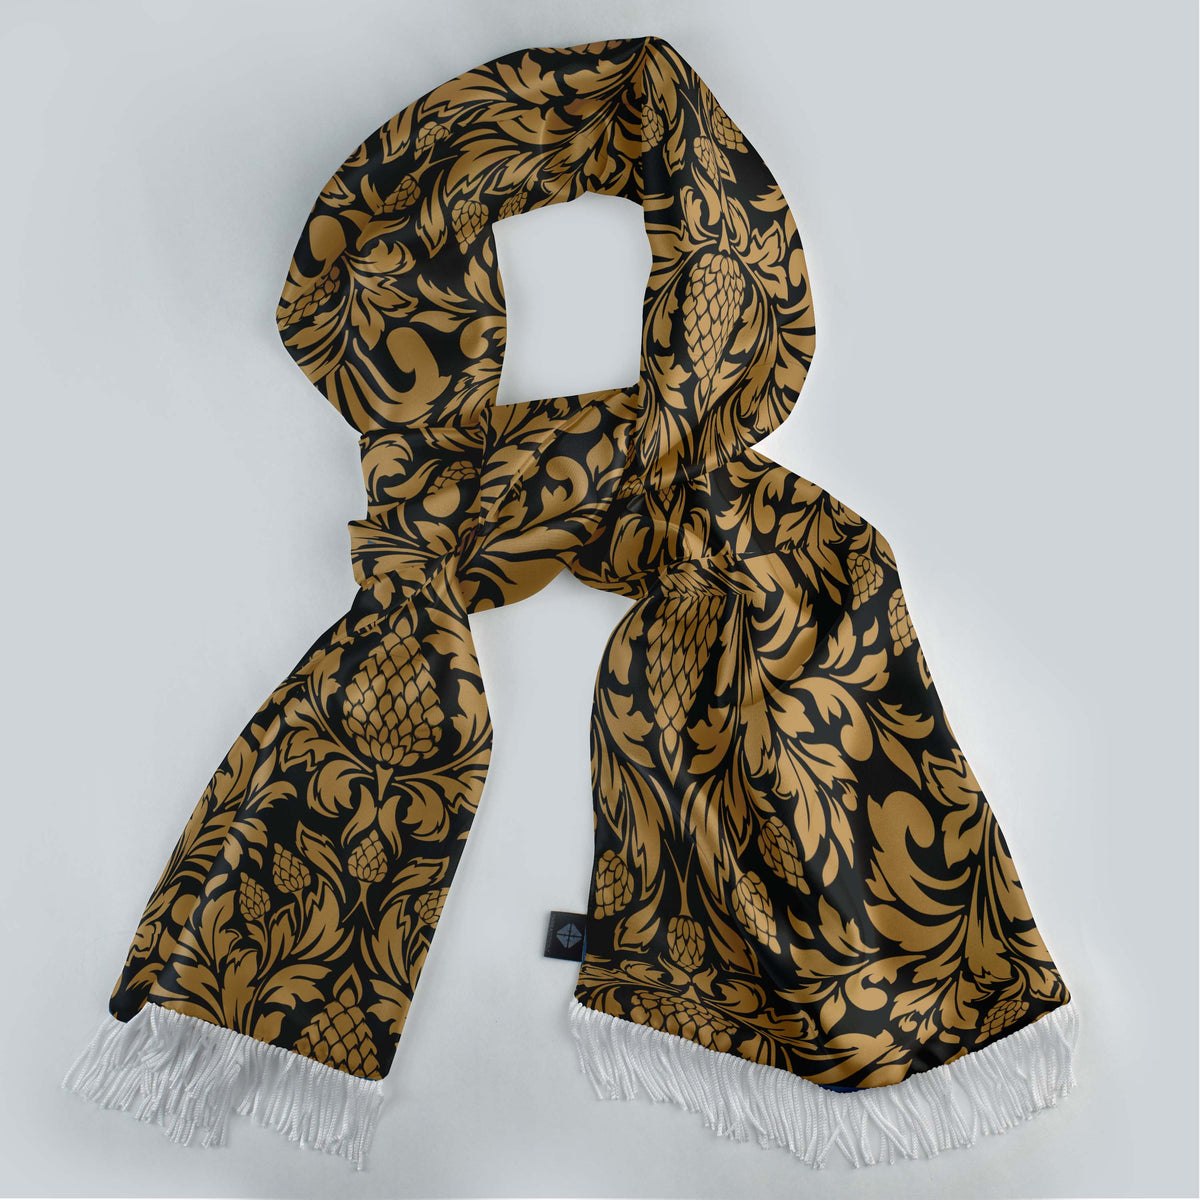 THE GOLD VINTAGE SILK SCARF